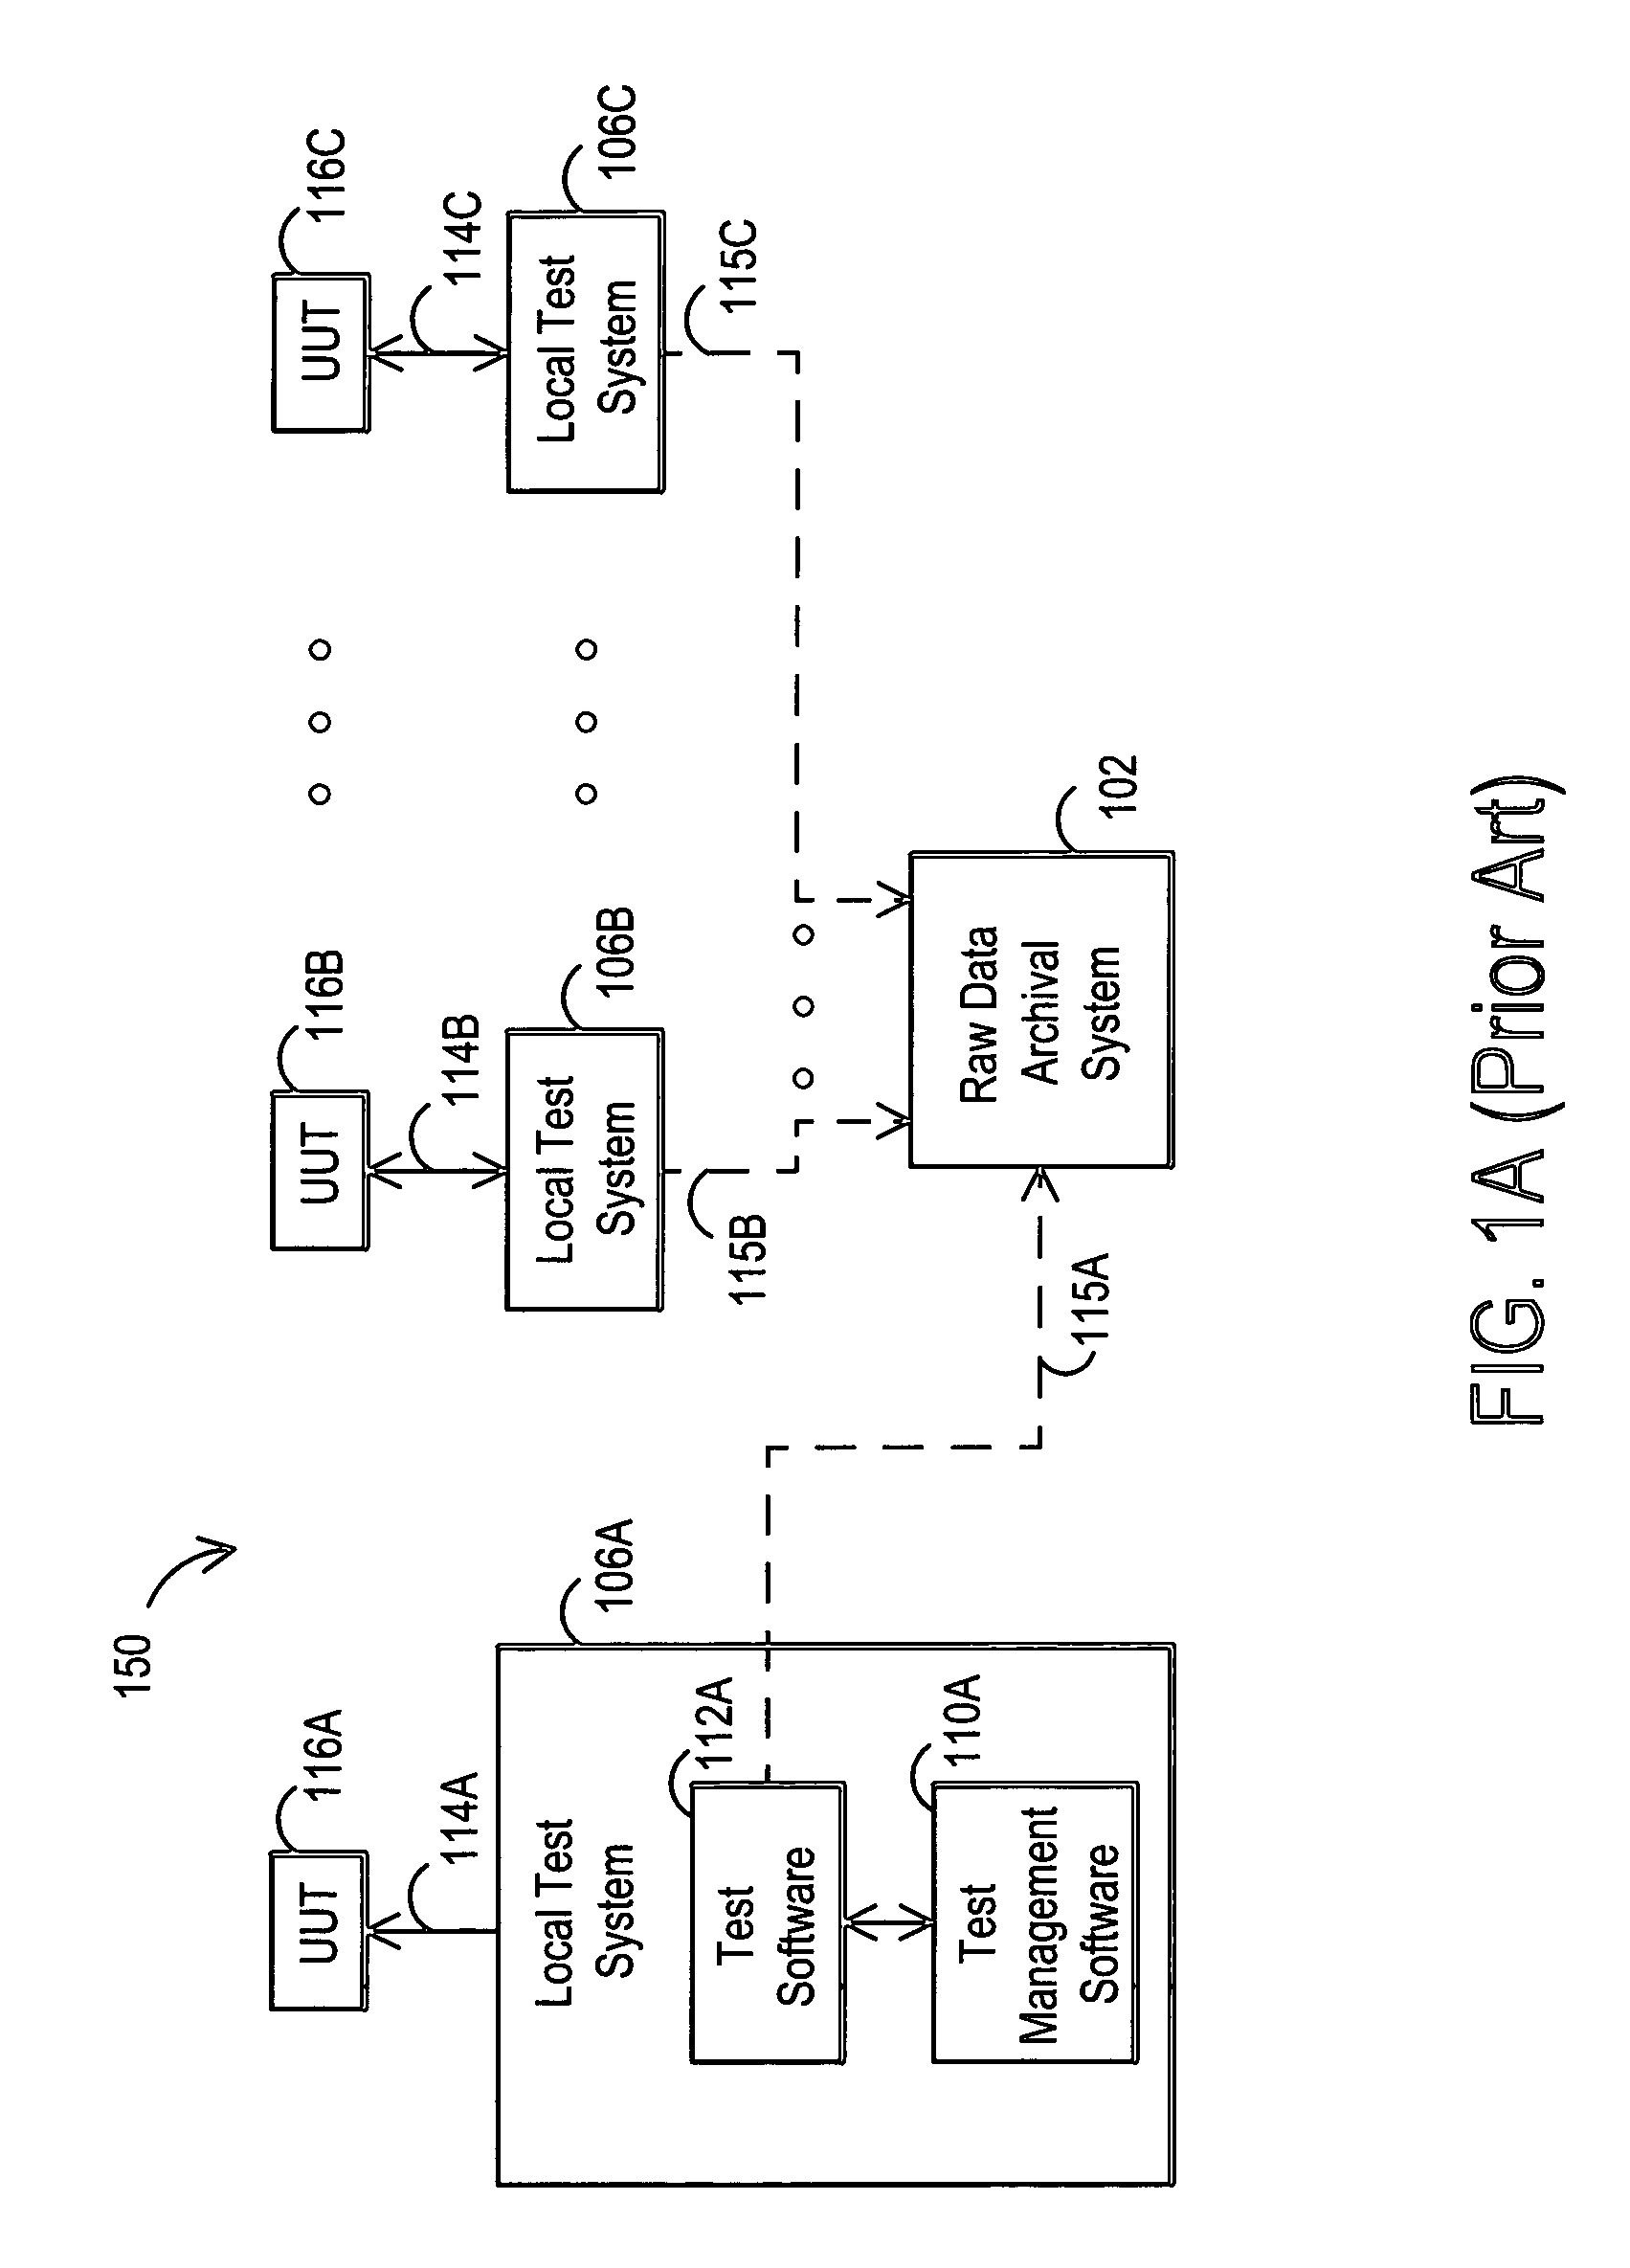 Test configuration and data management system and associated method for enterprise test operations